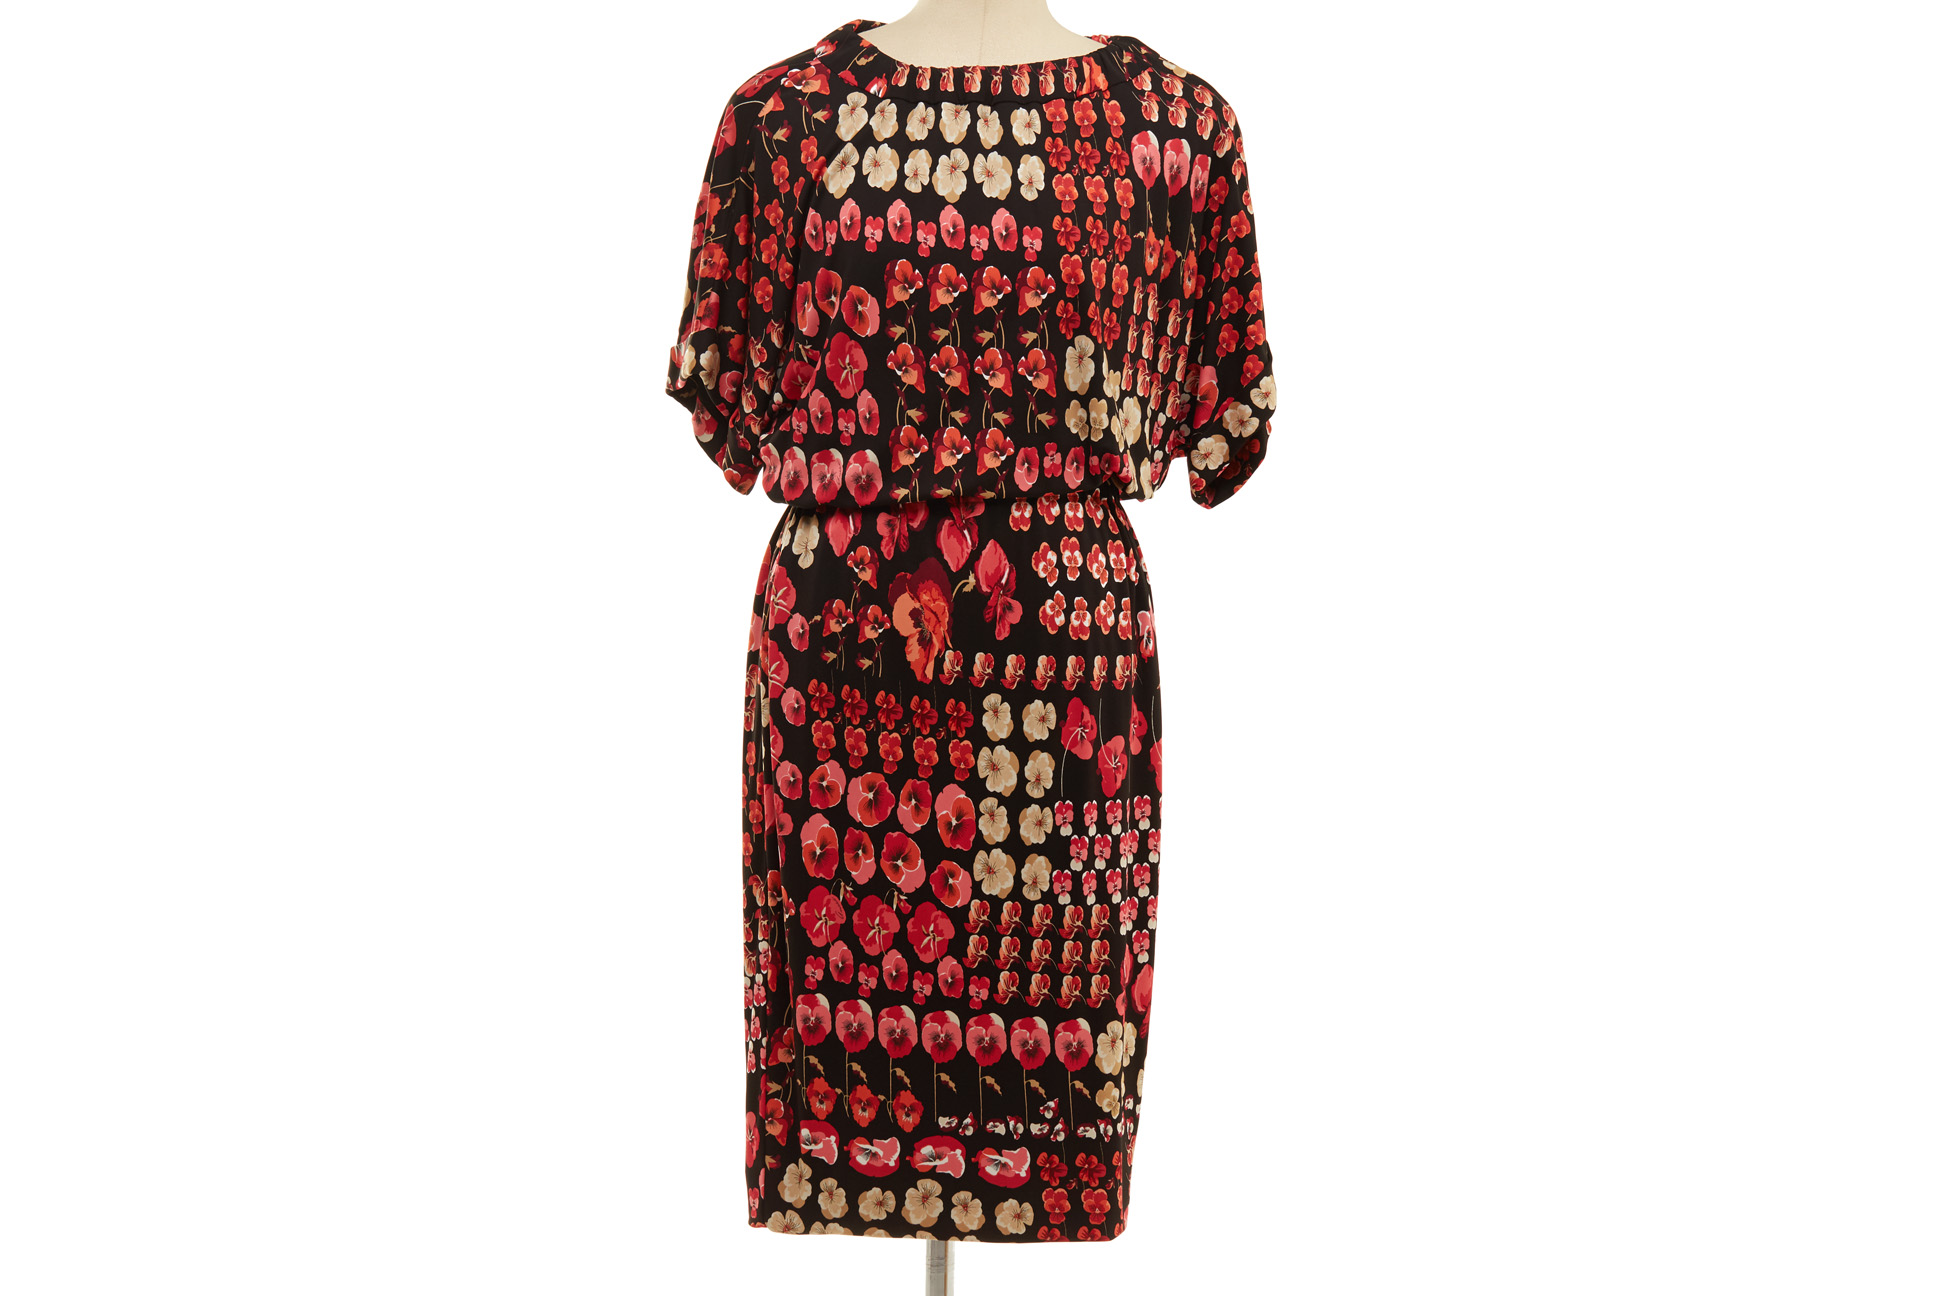 A GUCCI RED AND BLACK FLORAL PRINTED DRESS